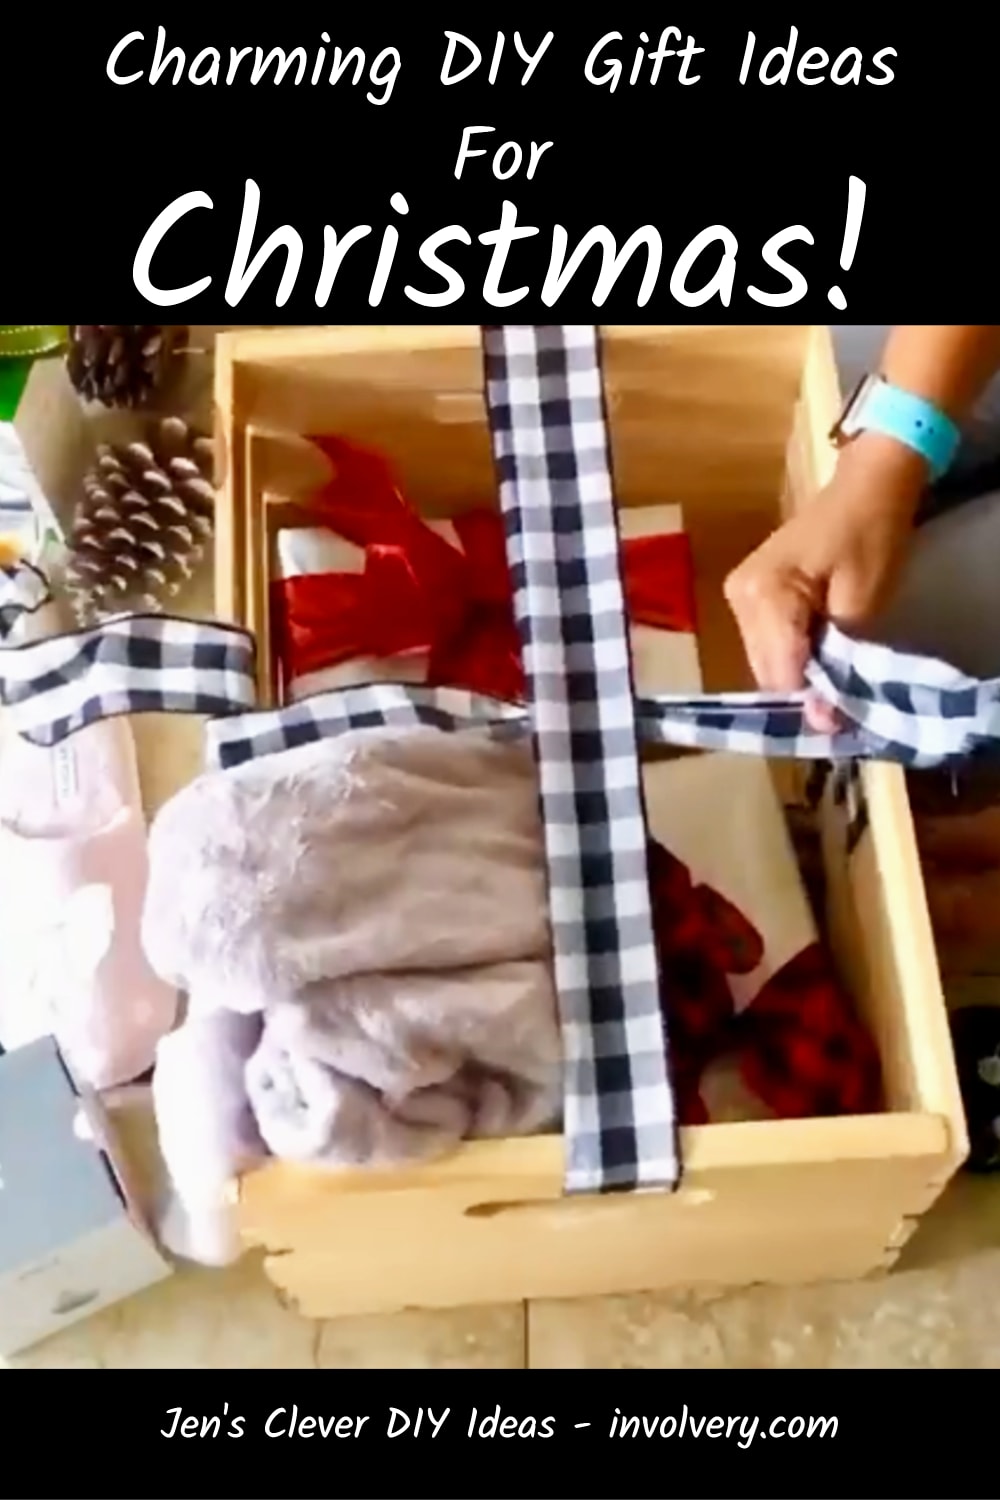 Handmade Christmas gift basket ideas - put his or her favorite things in a wooden crate box